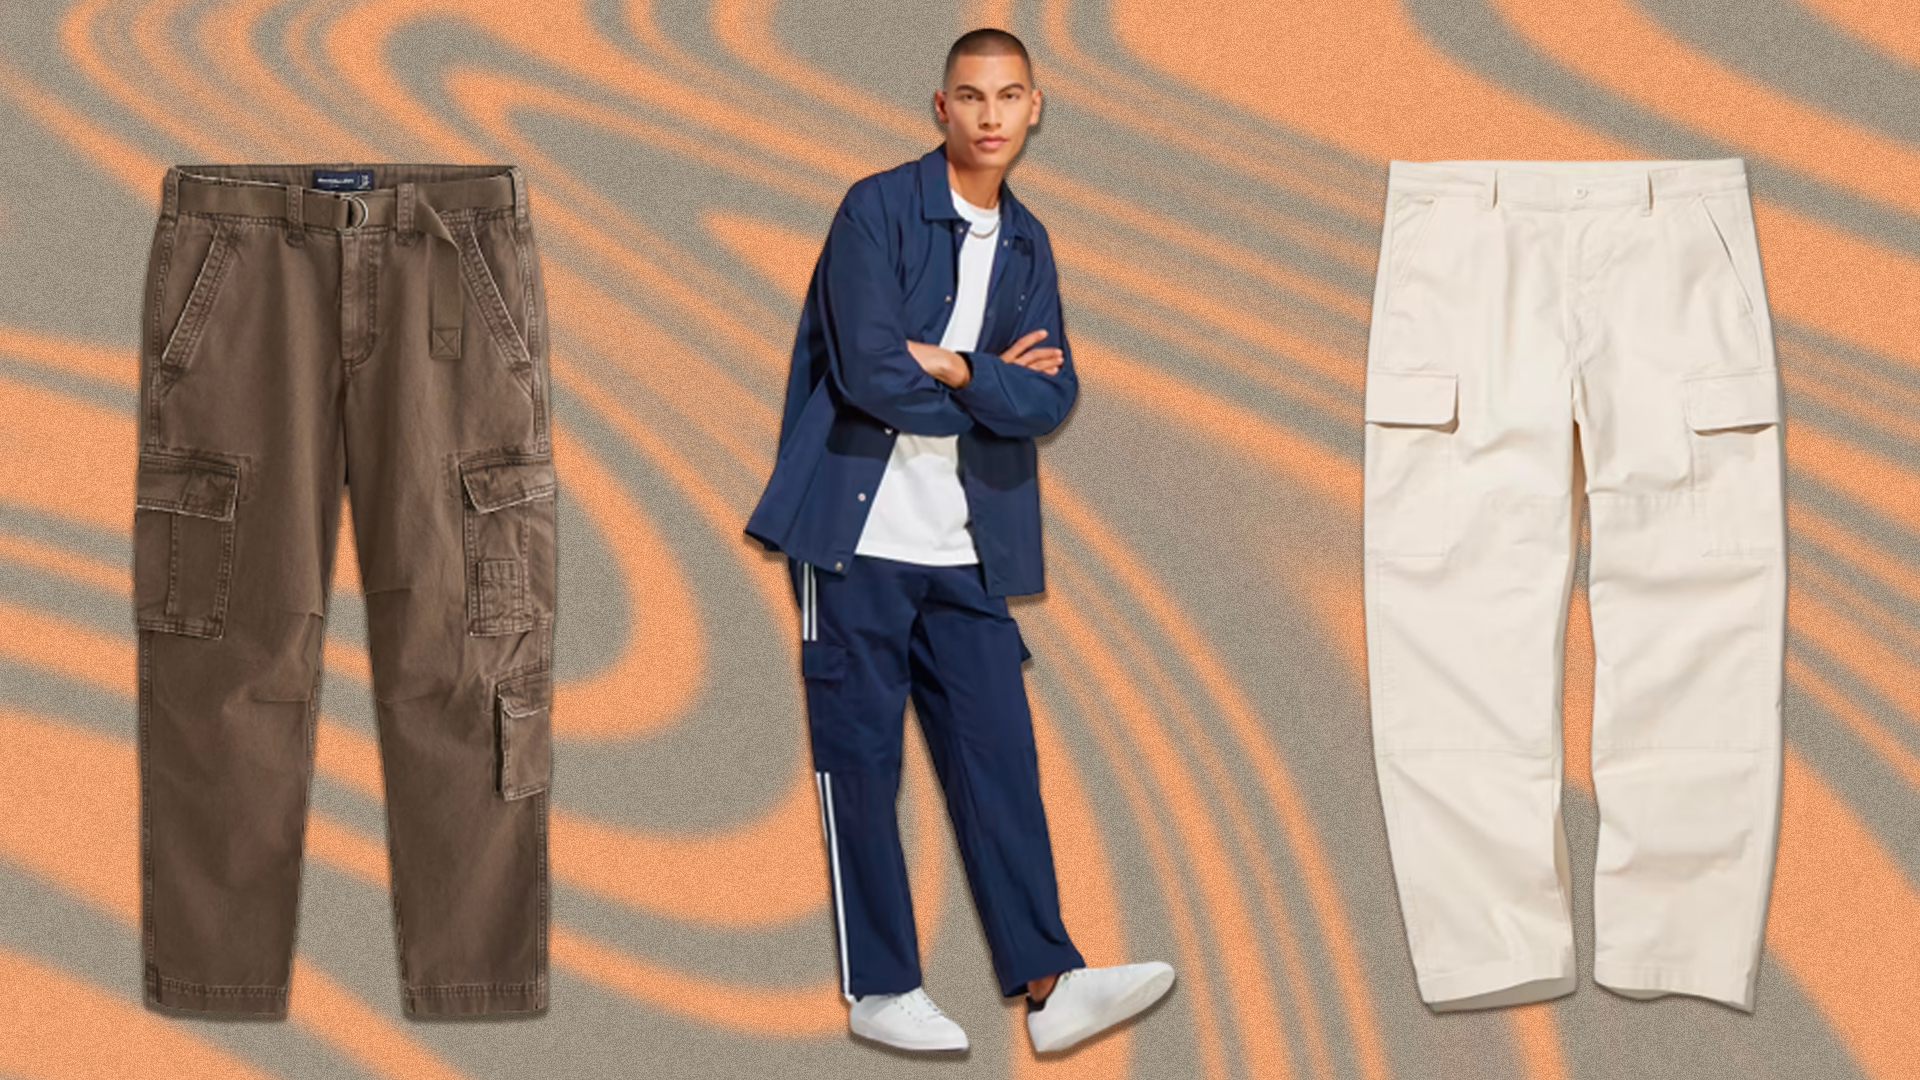 Get these cargo pants for men for affordable workwear style - The Manual